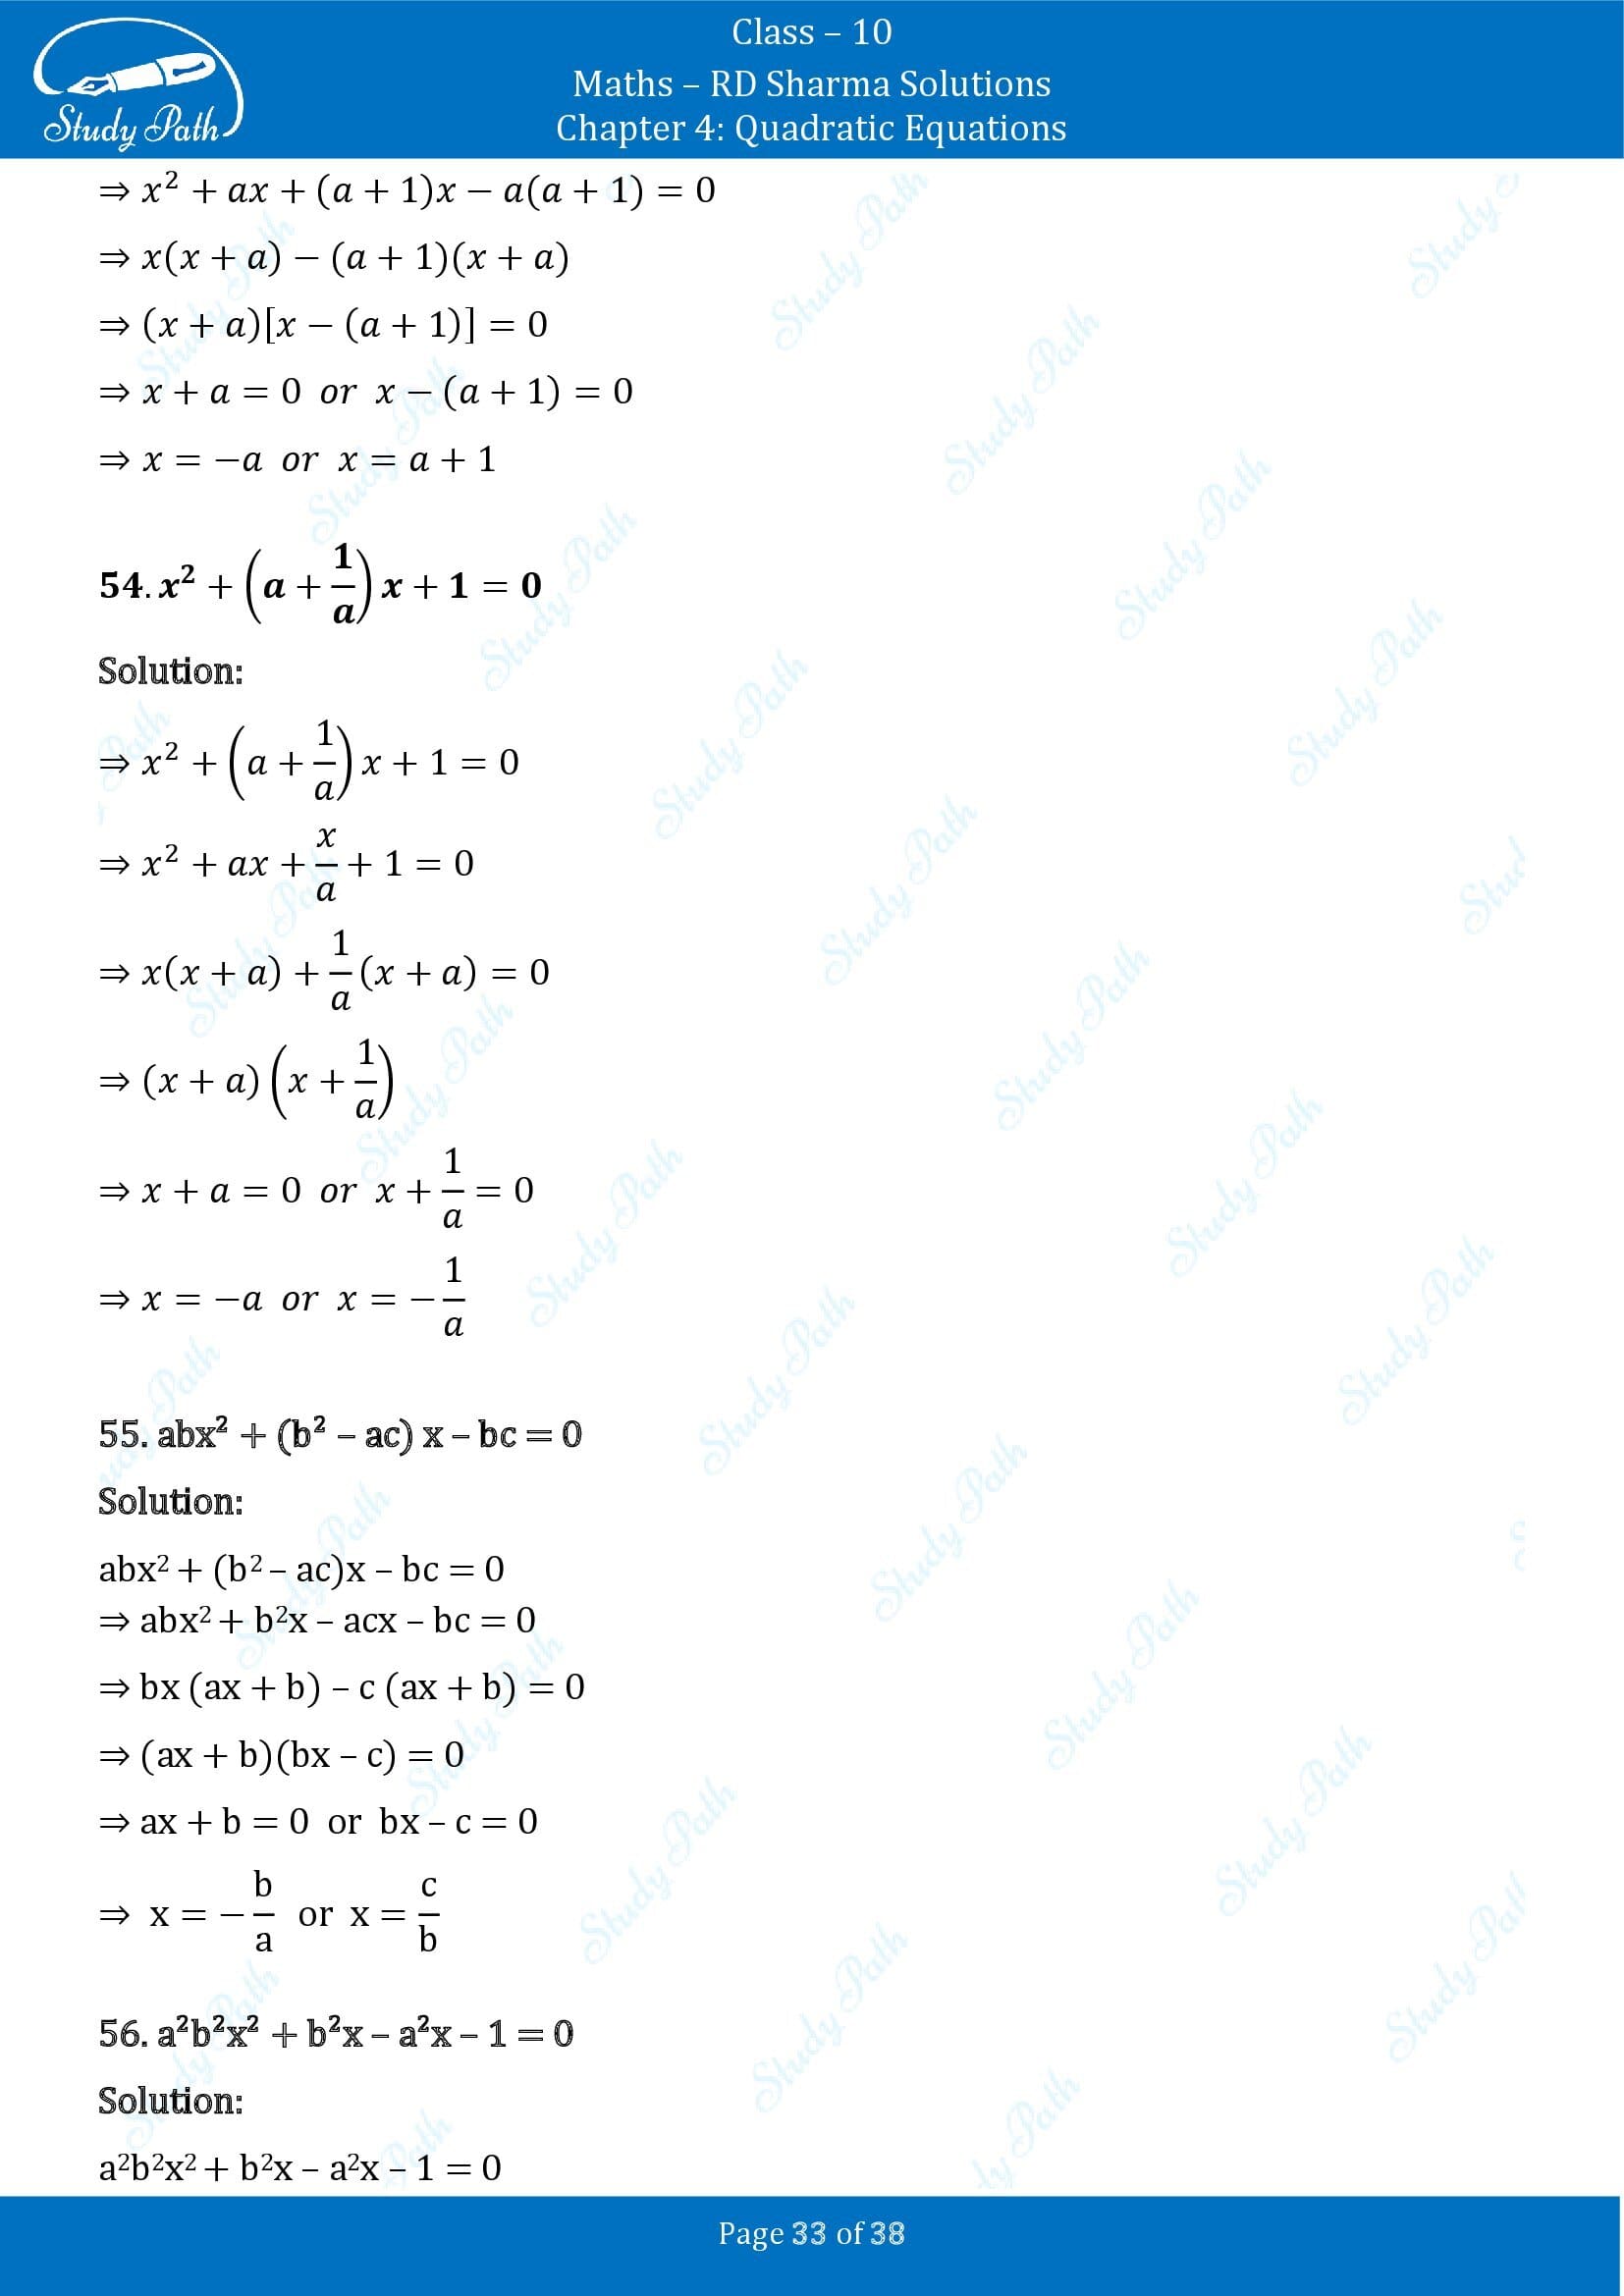 RD Sharma Solutions Class 10 Chapter 4 Quadratic Equations Exercise 4.3 00033